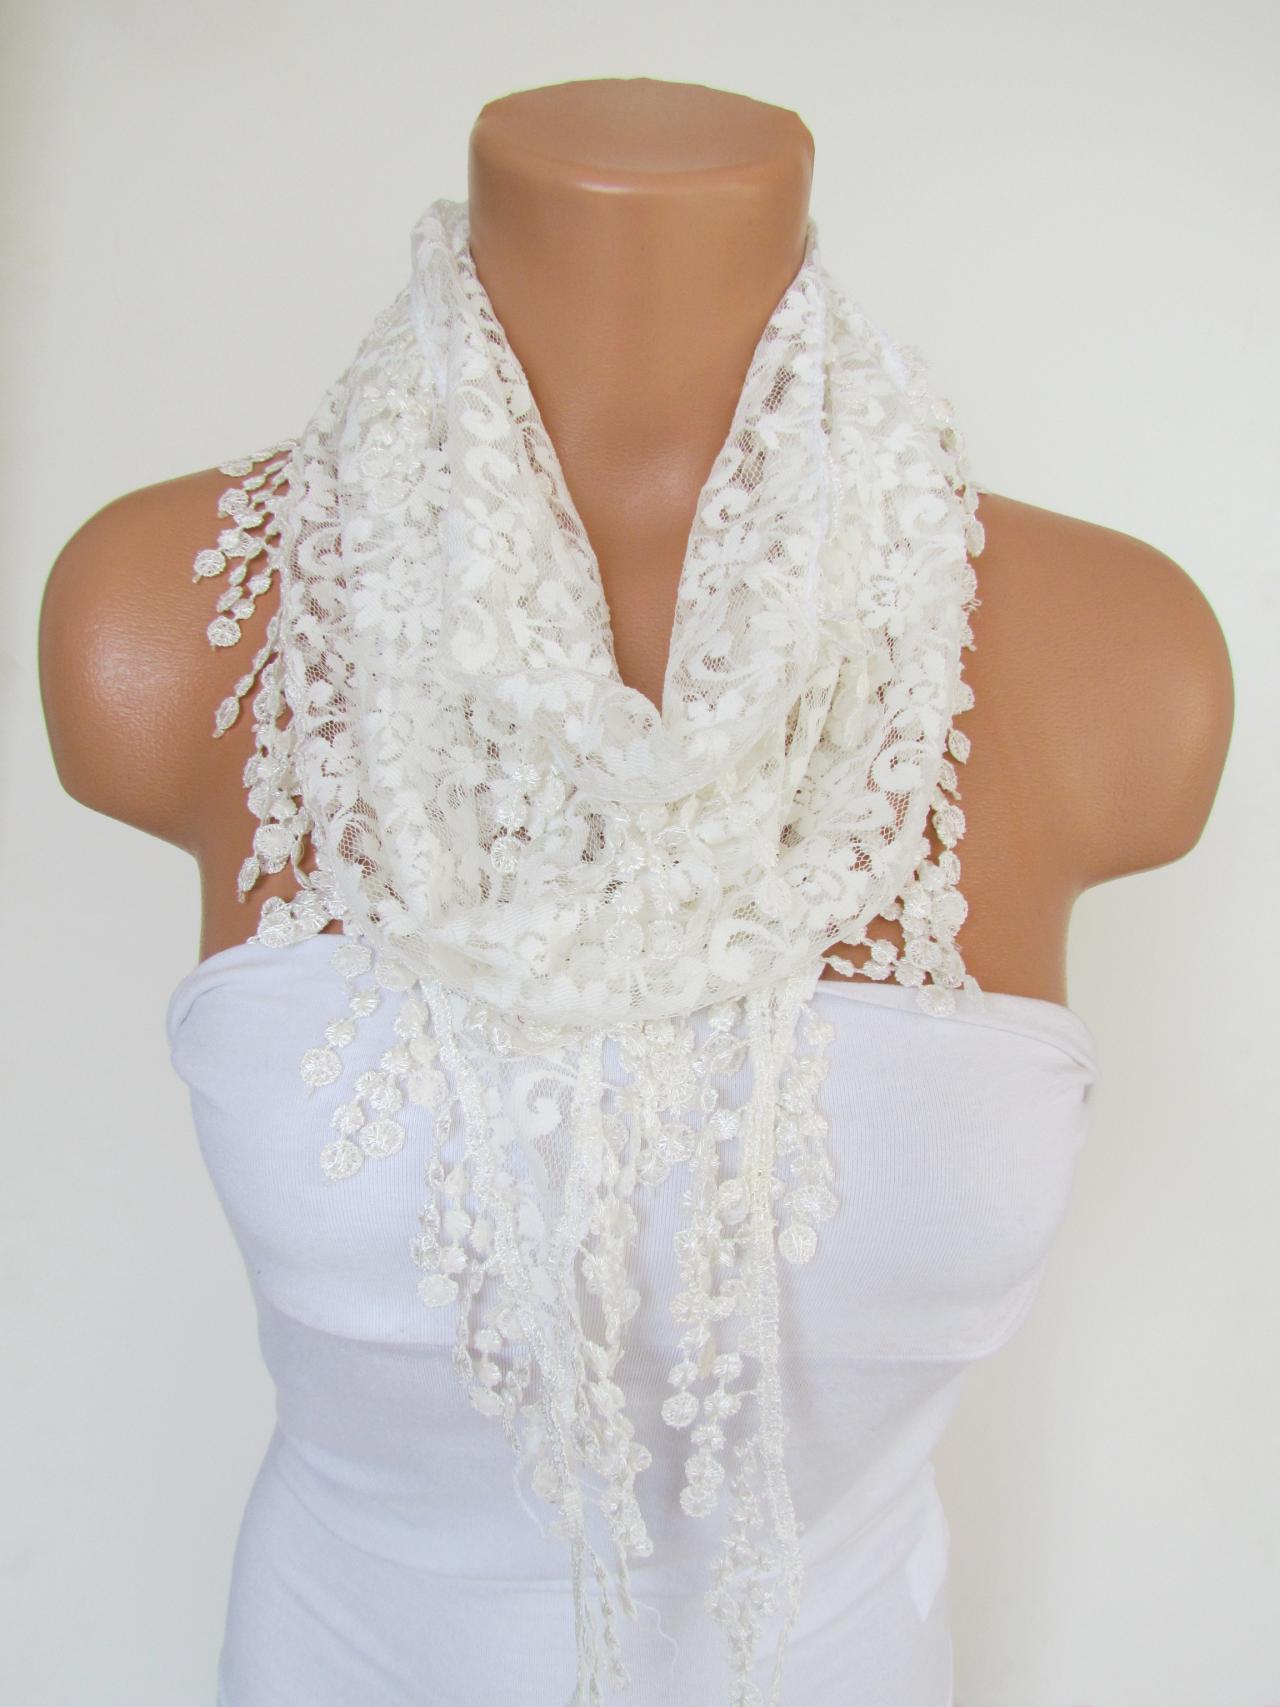 Cream Long Scarf With Fringe-Winter Fashion Scarf-Headband-Necklace- Infinity Scarf- Winter Accessory-Long Scarf